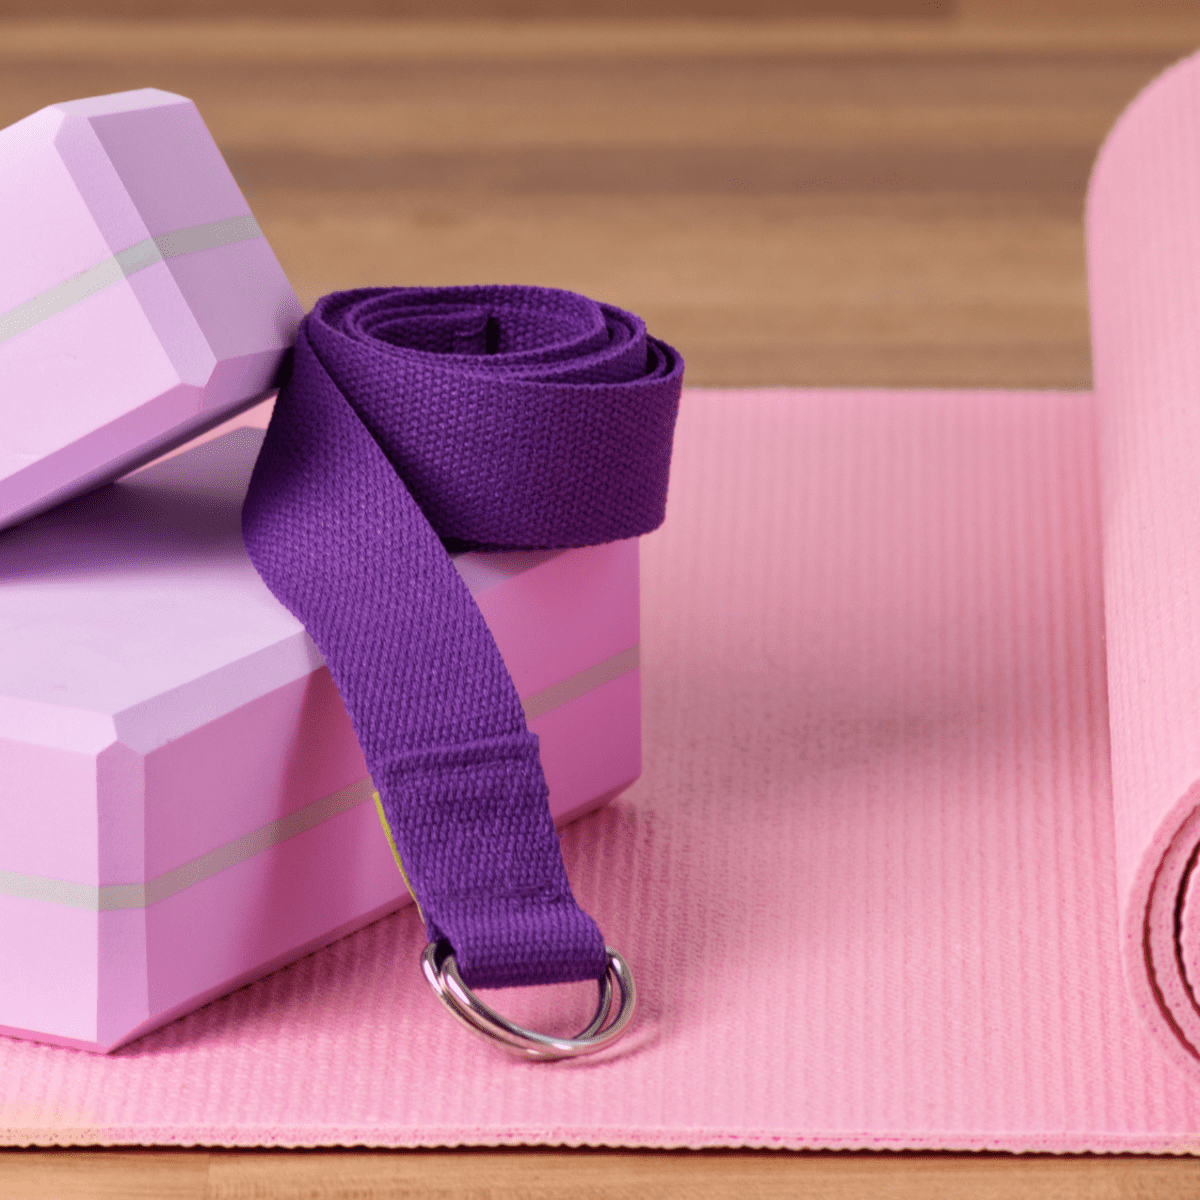 Best Yoga Props: 10 Yoga Props You'll Actually Use - Parade